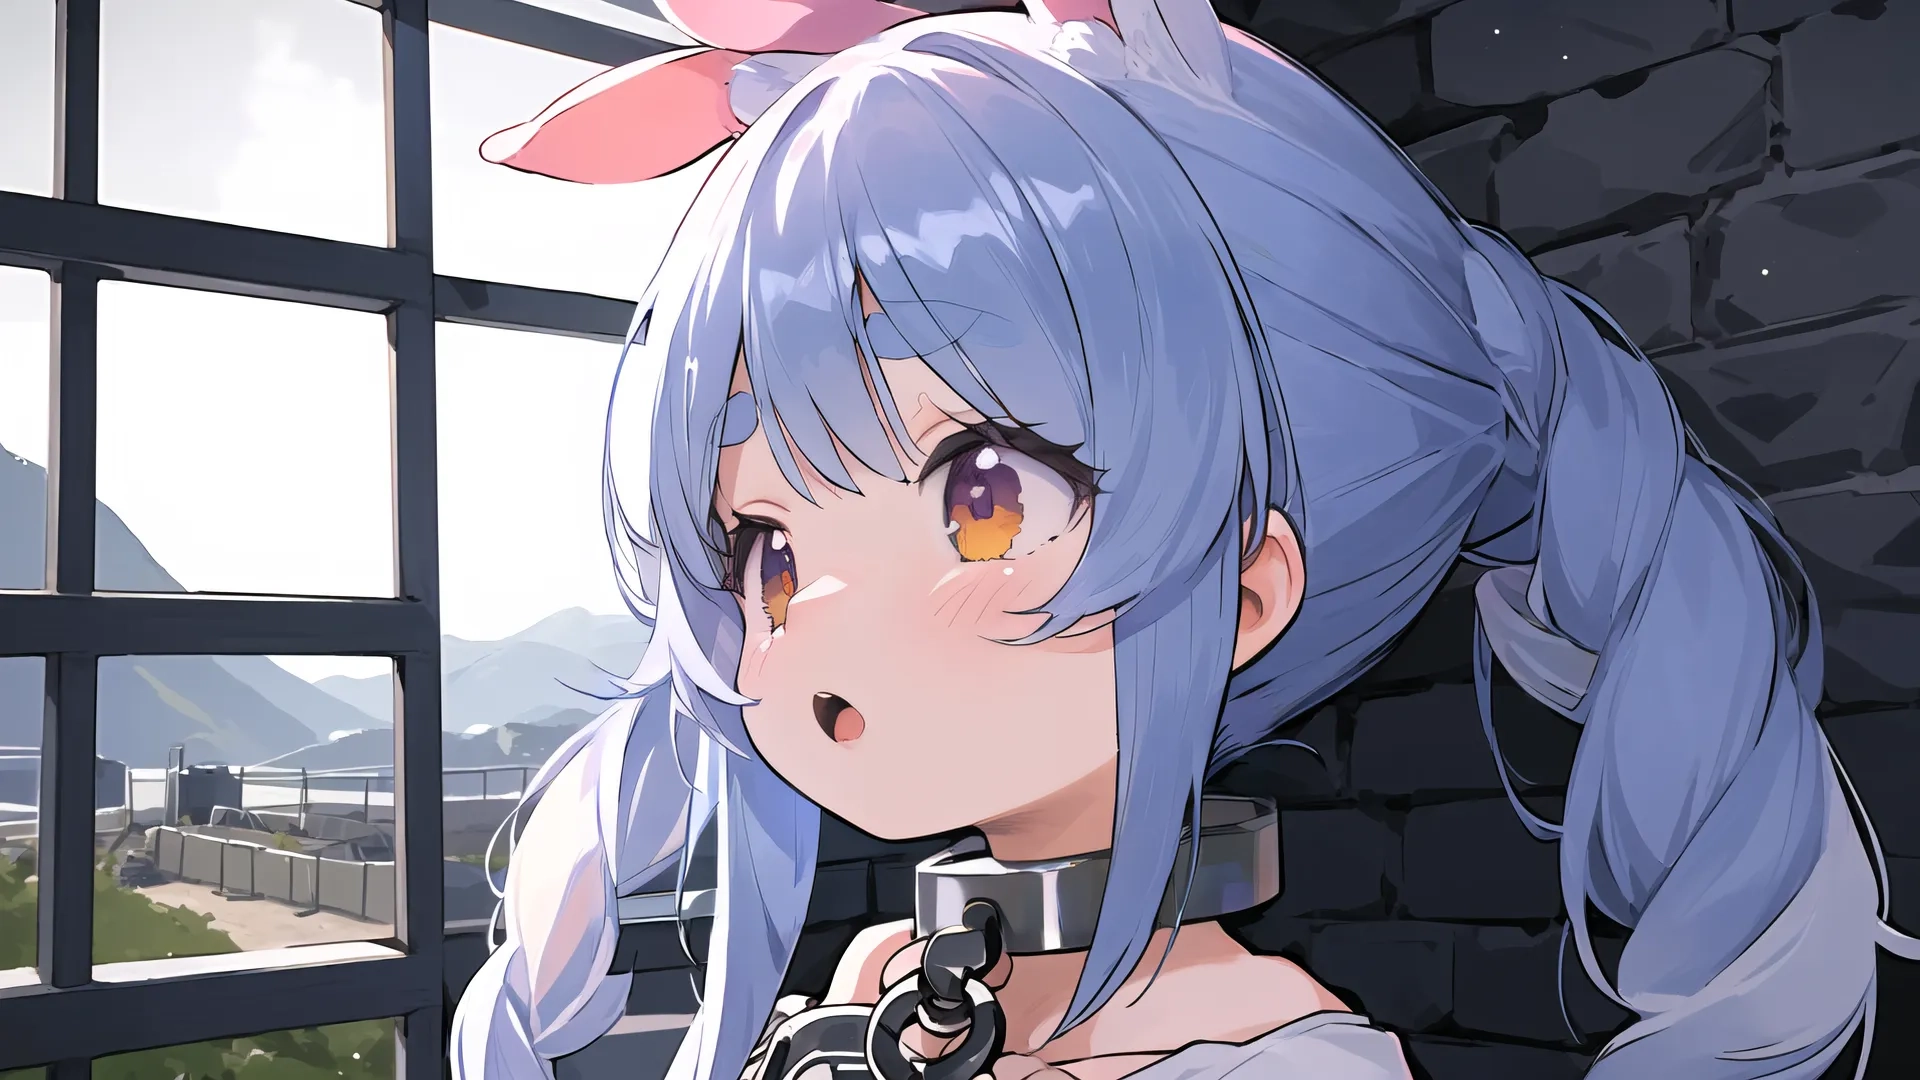 anime girl standing next to window with gun in hand showing off her camera's finger and her face painted in a purple flower and black
